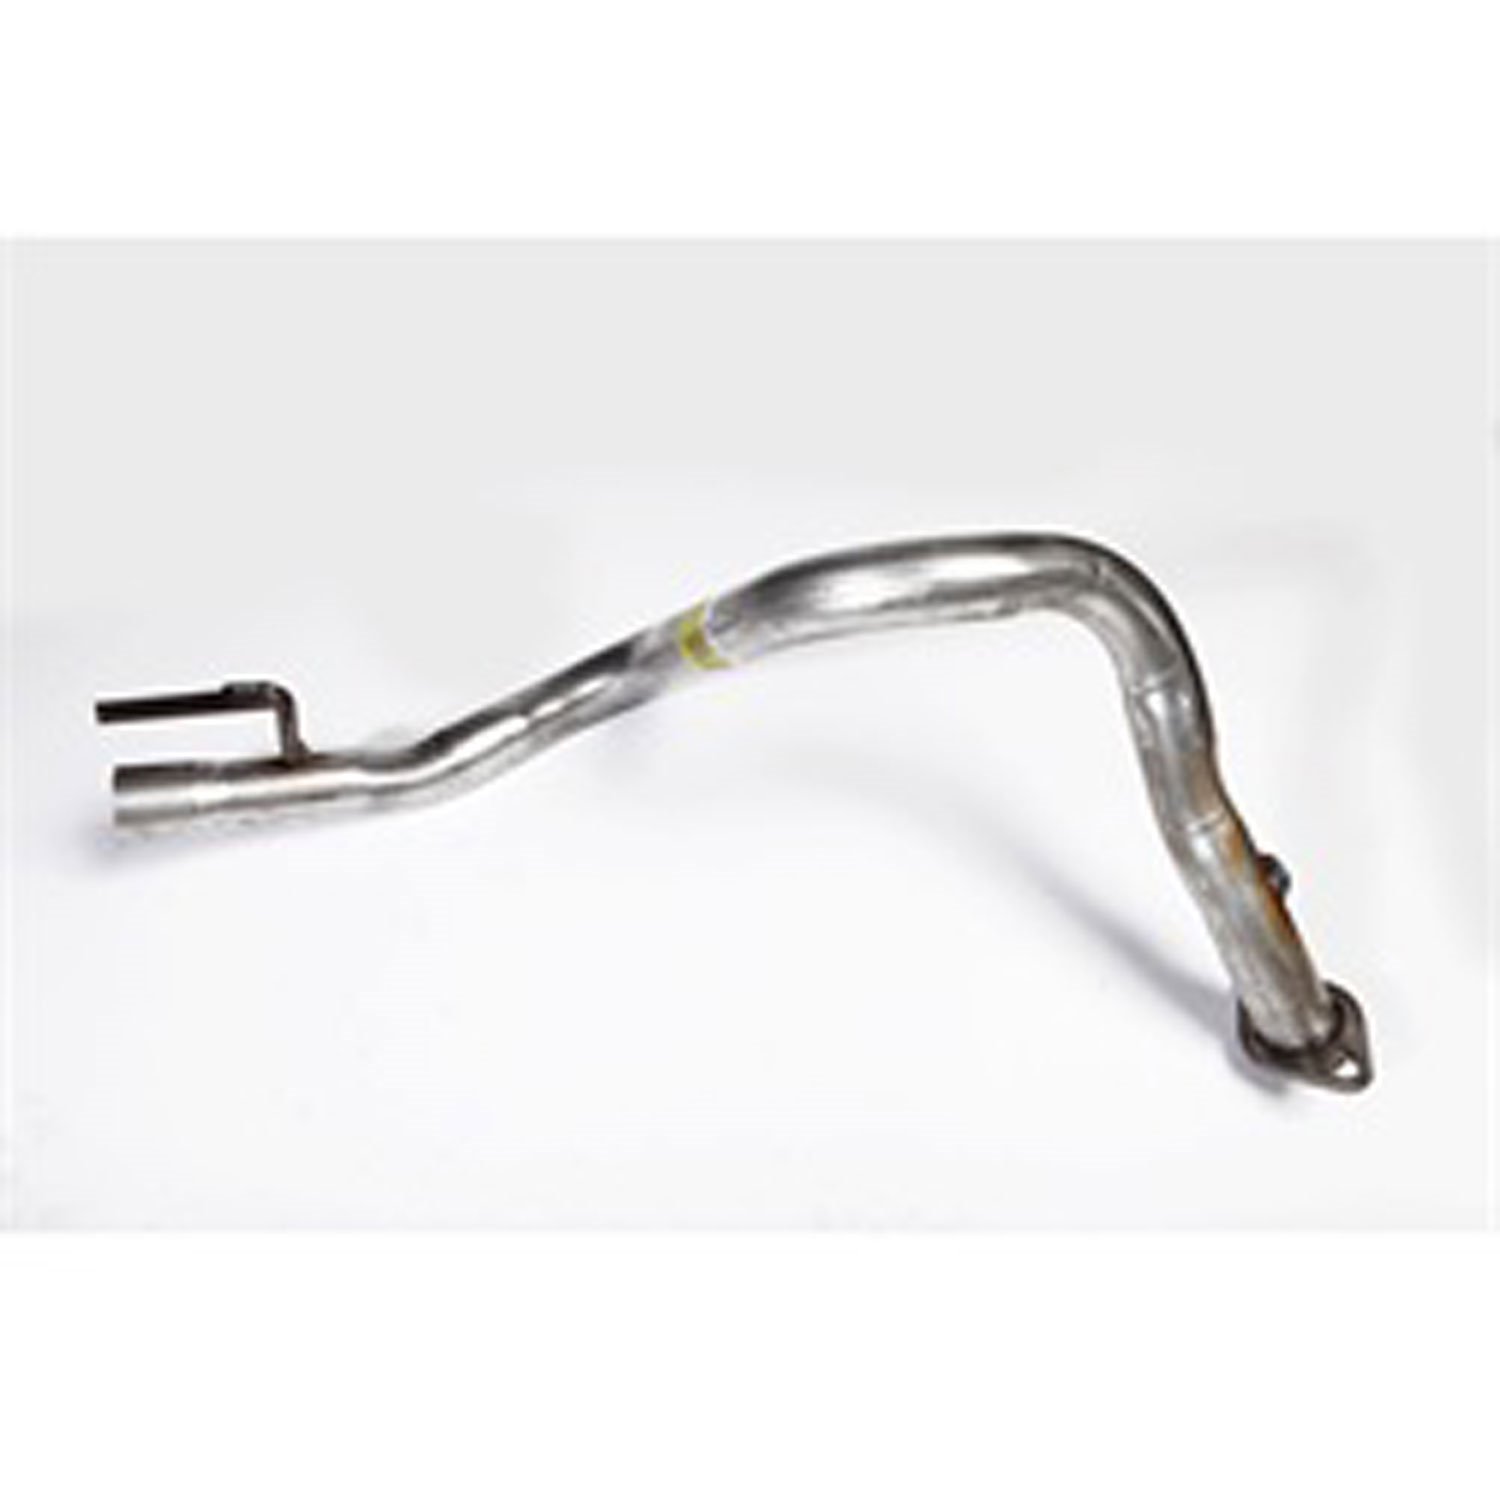 Head Pipe Exhaust 2.5L 1993-1995 Jeep Wrangler YJ